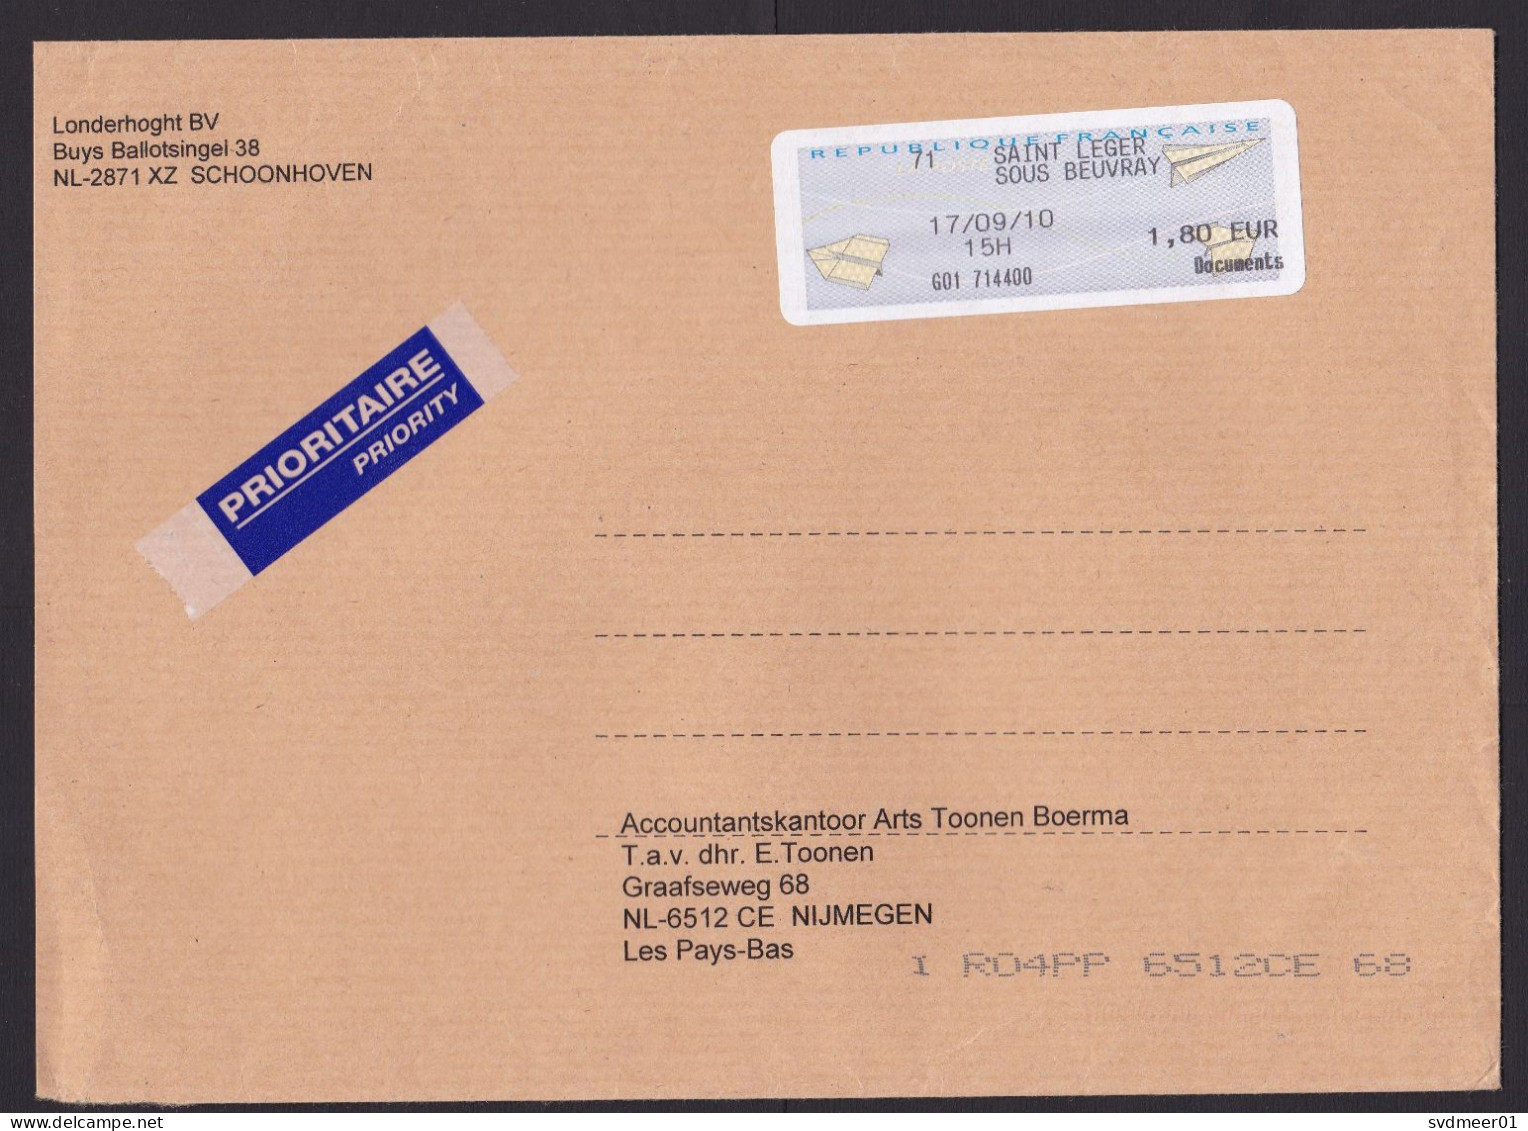 France: Priority Cover To Netherlands, 2010, ATM Machine Label, 1.80 Documents Rate, Saint Leger (traces Of Use) - Storia Postale